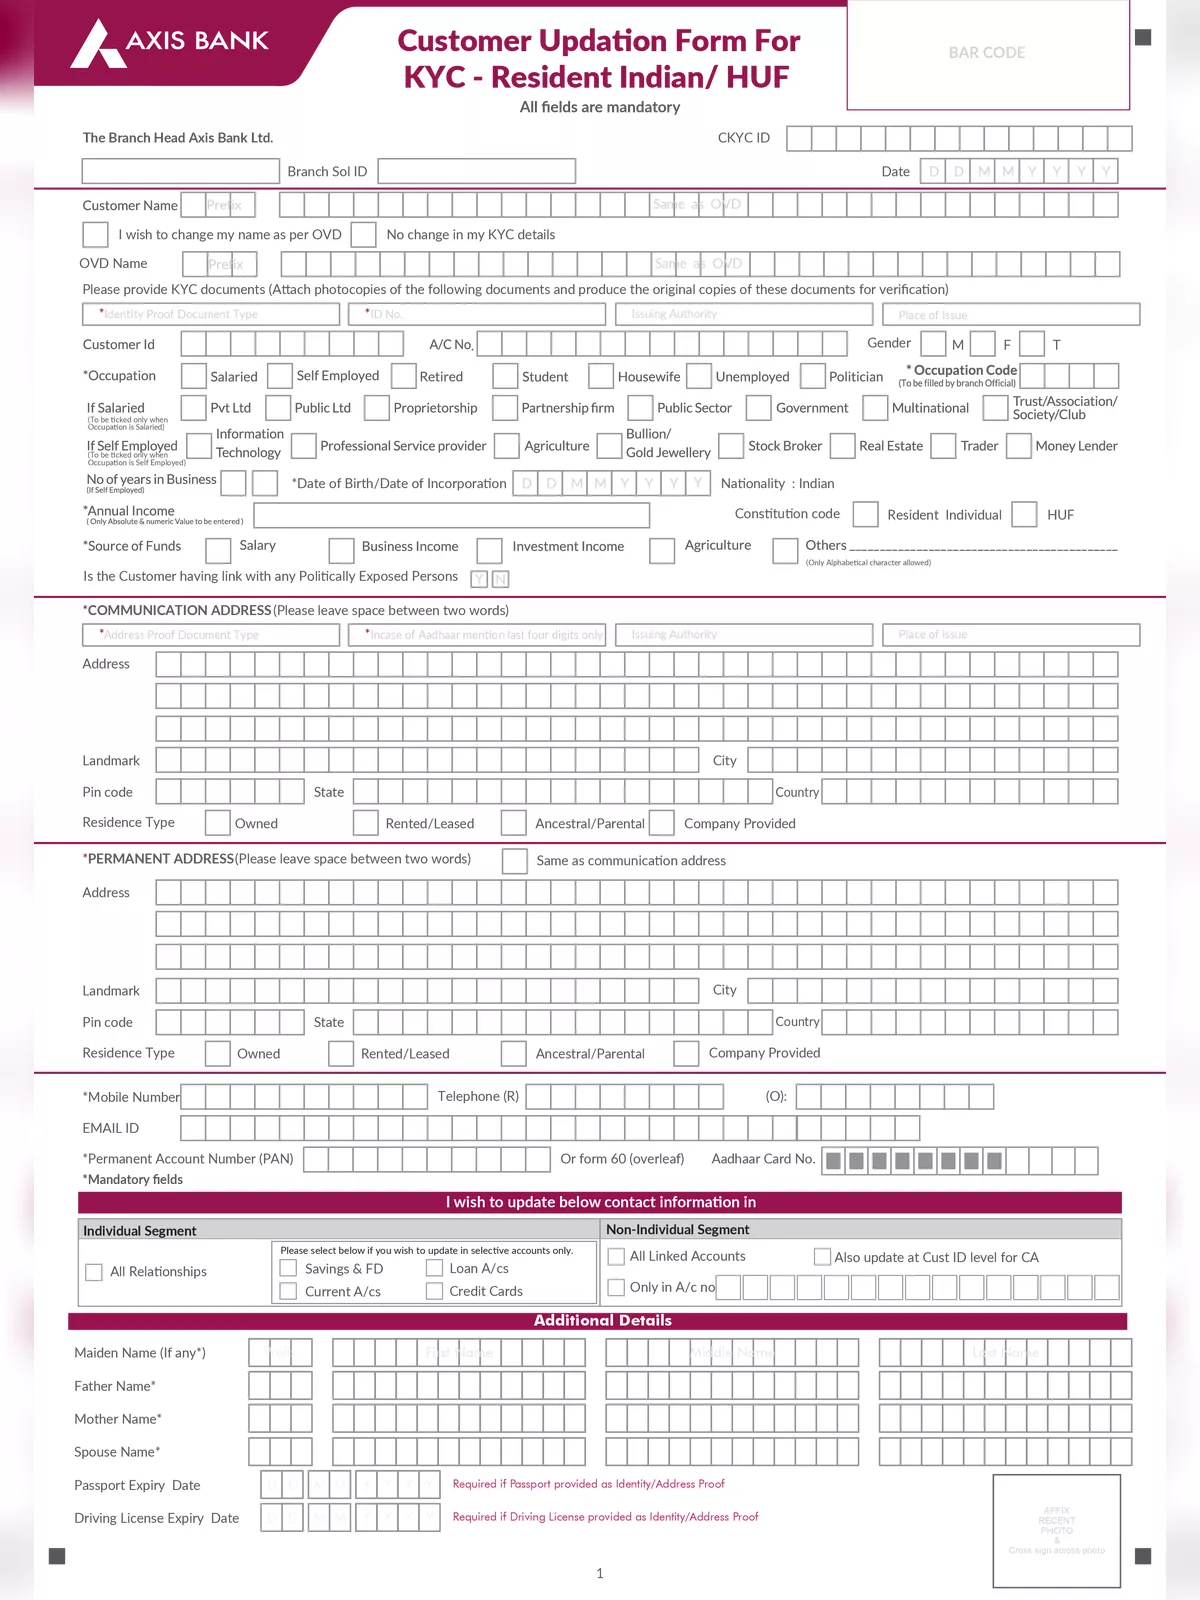 Axis Bank Re-KYC Form